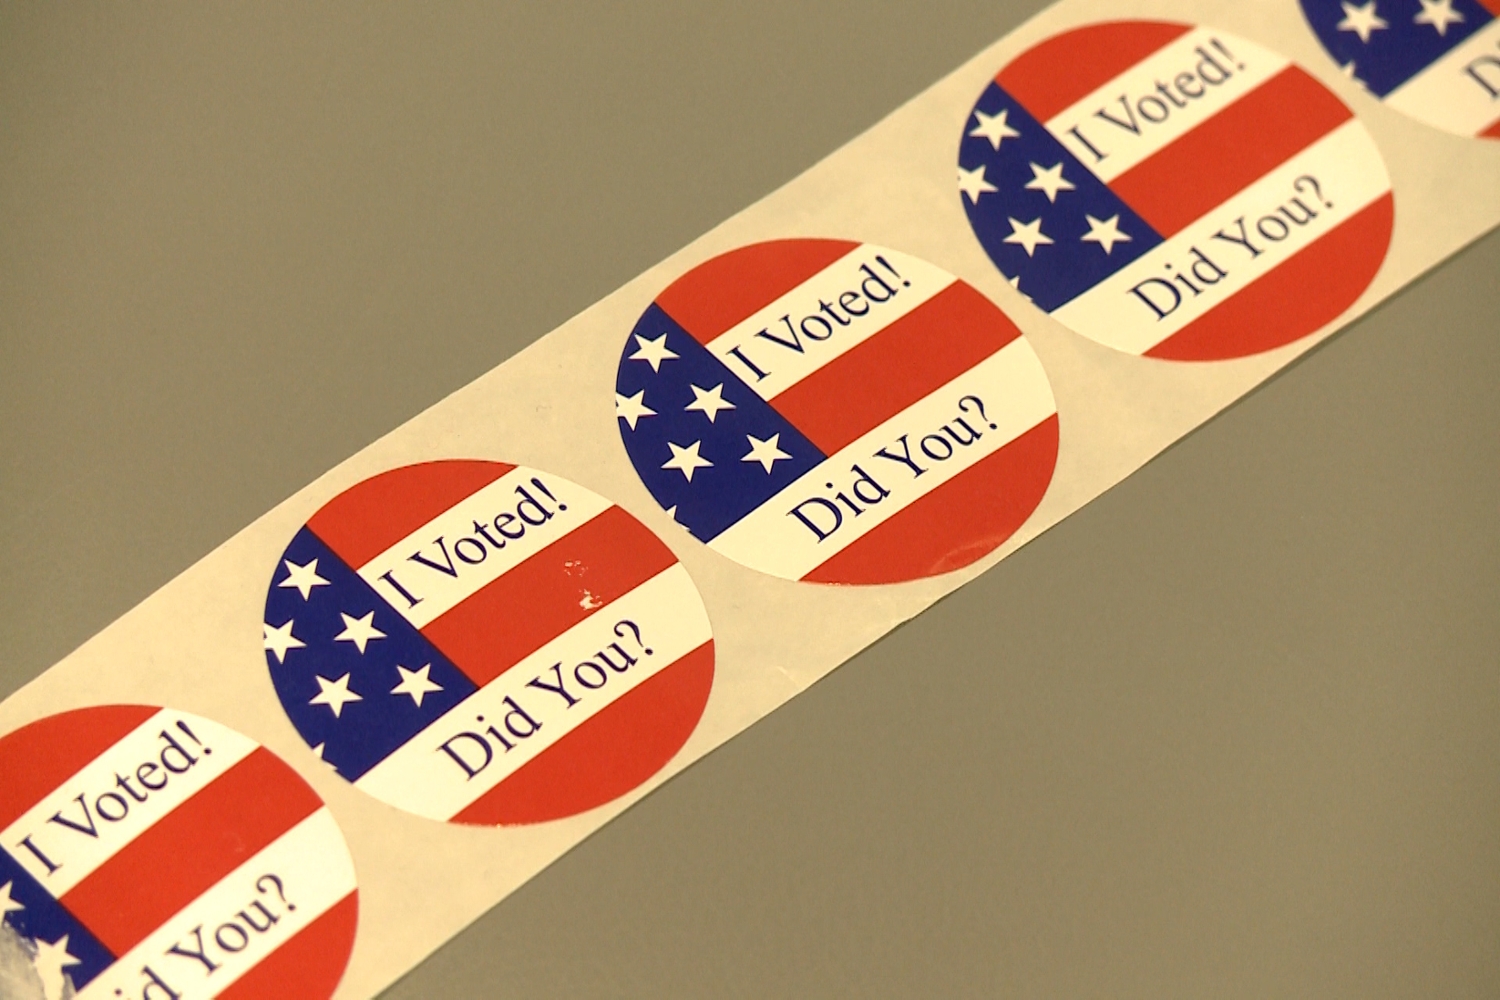 "I Voted" stickers at a polling place in Bloomington, Indiana.